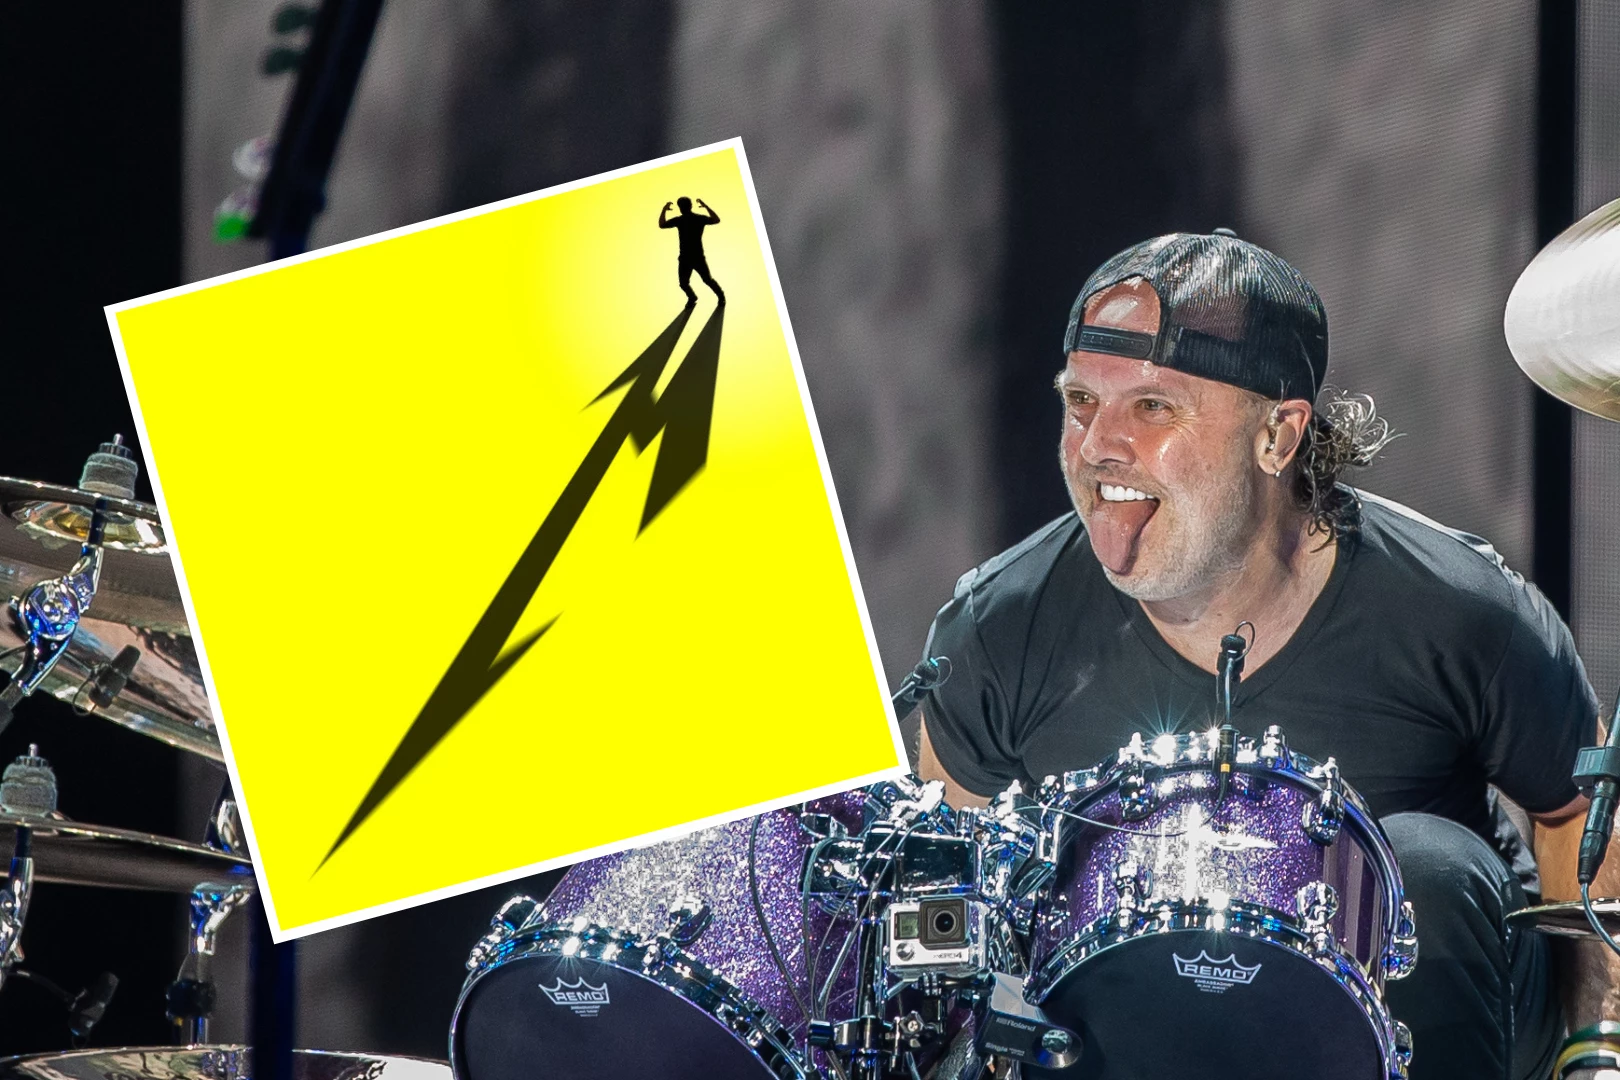 Hear Lars Ulrich's Isolated Tracks From Metallica's 'Lux Aeterna'